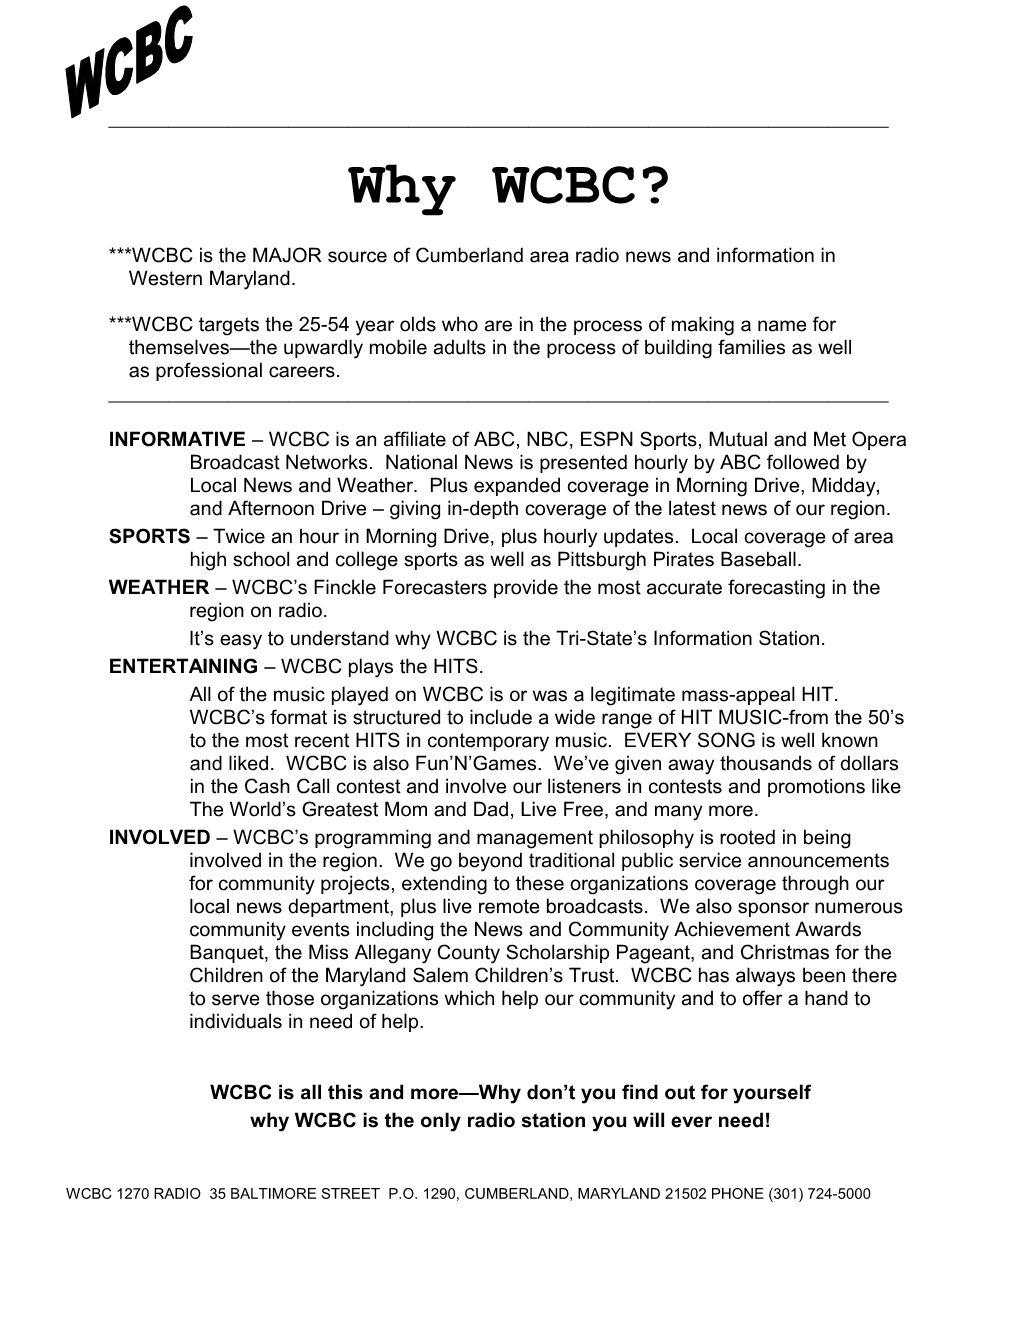 WCBC Is the MAJOR Source of Cumberland Area Radio News and Information In